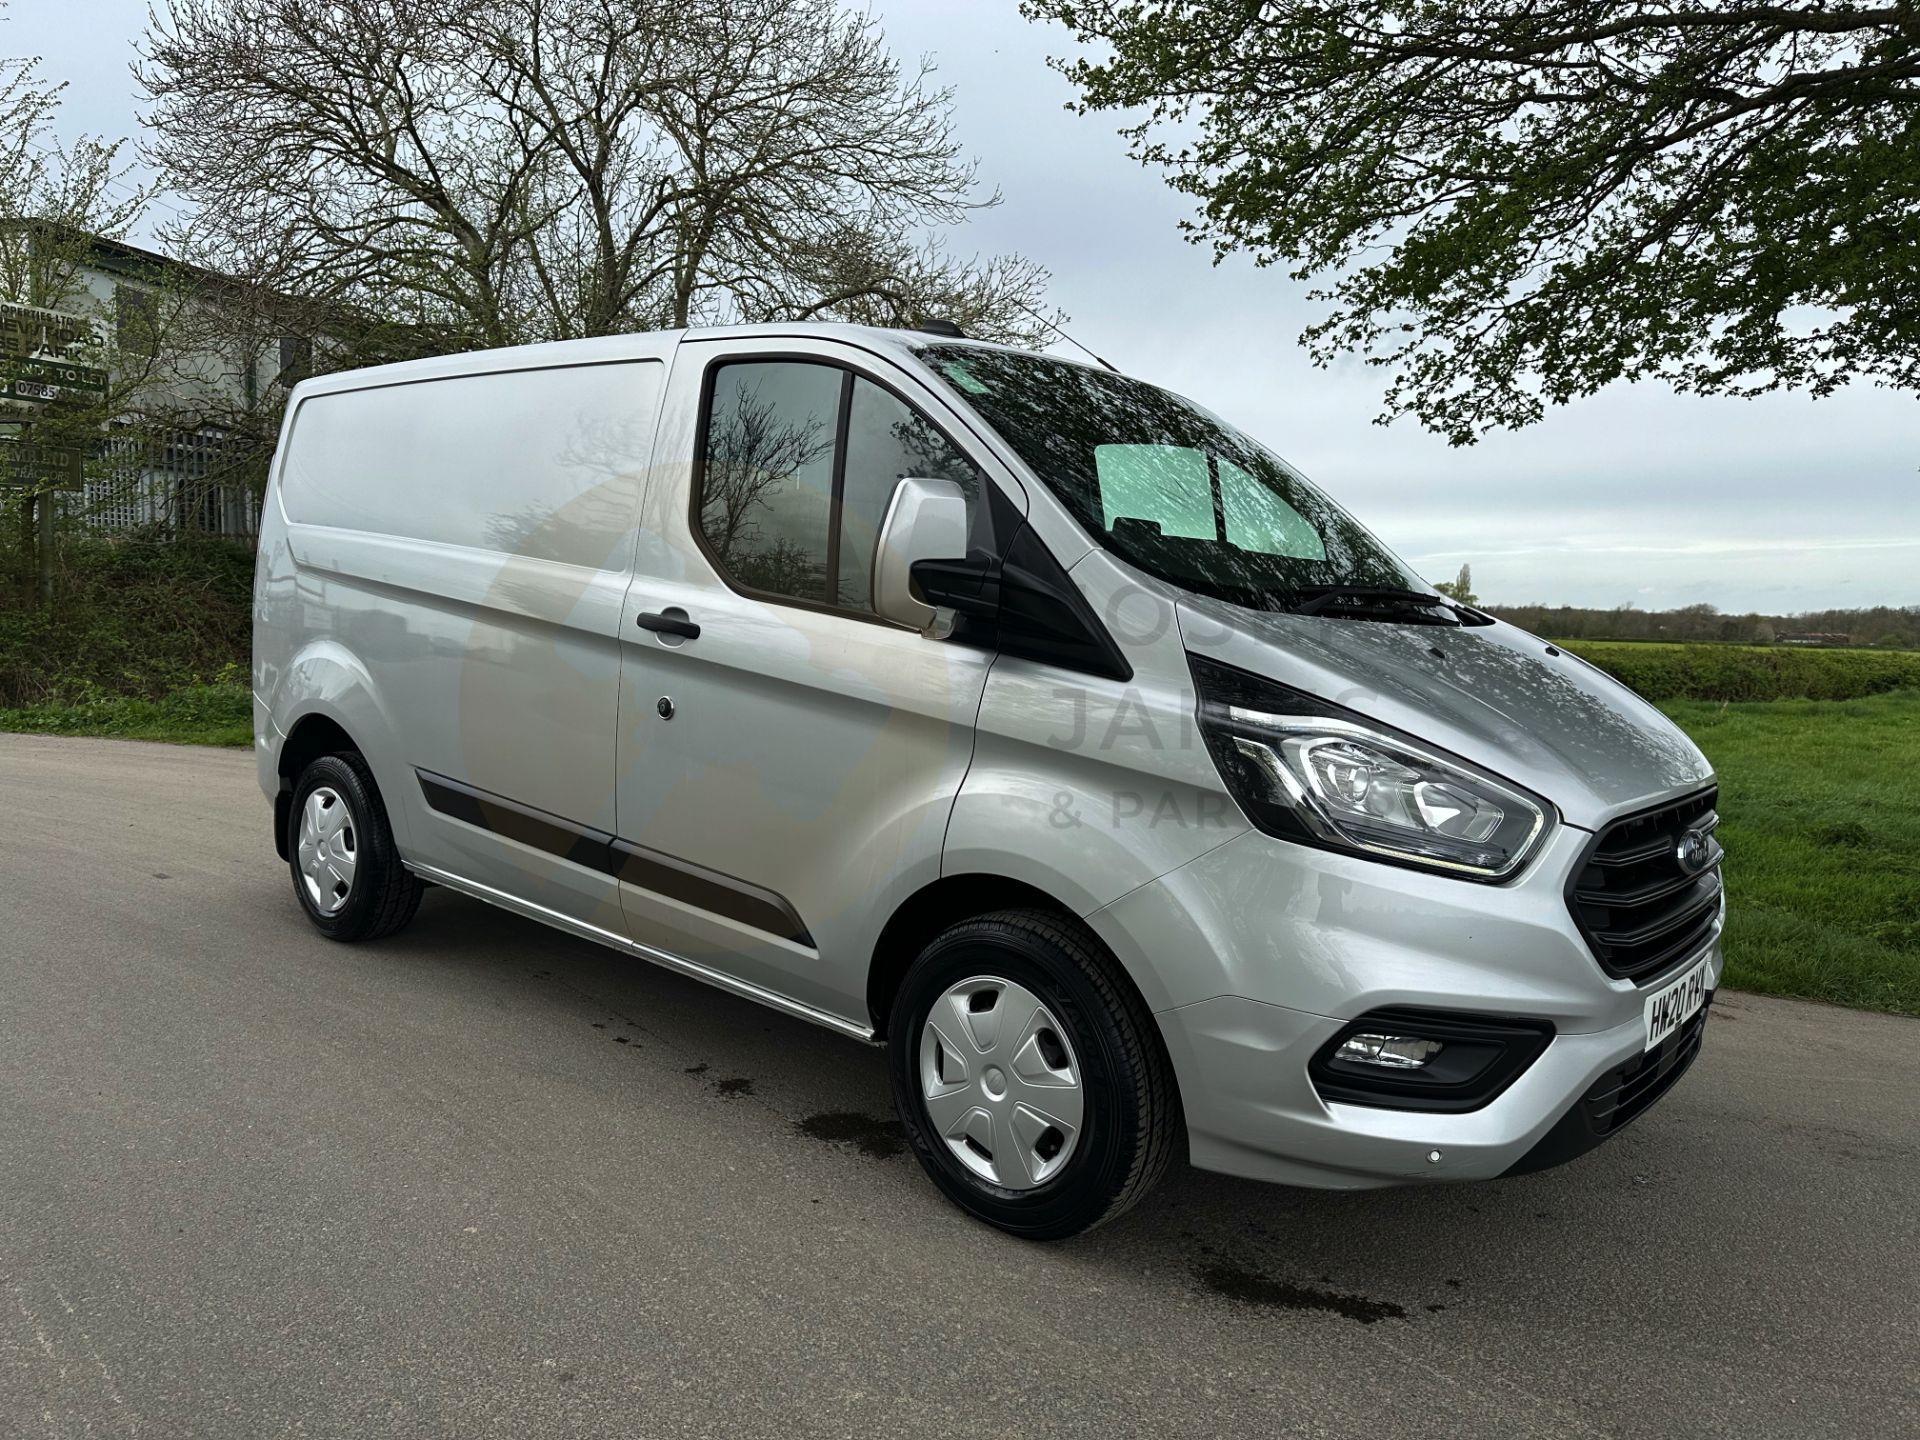 (ON SALE) FORD TRANSIT CUSTOM "TREND" 2.0TDCI (130) 20 REG -1 OWNER- SILVER -GREAT SPEC -LOW MILEAGE - Image 3 of 38